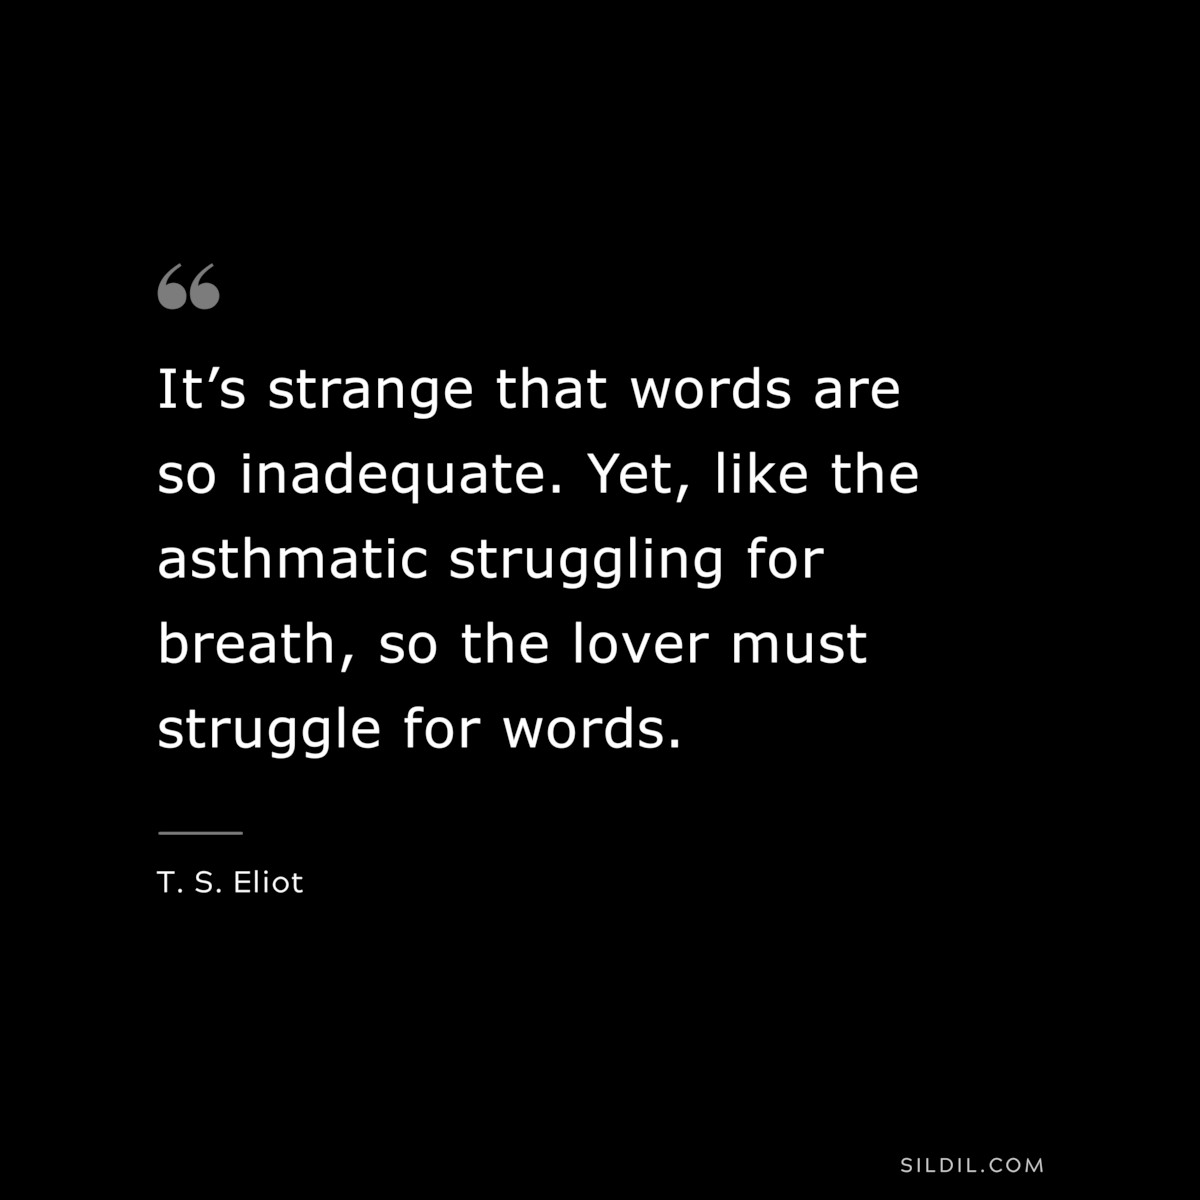 It’s strange that words are so inadequate. Yet, like the asthmatic struggling for breath, so the lover must struggle for words. ― T. S. Eliot